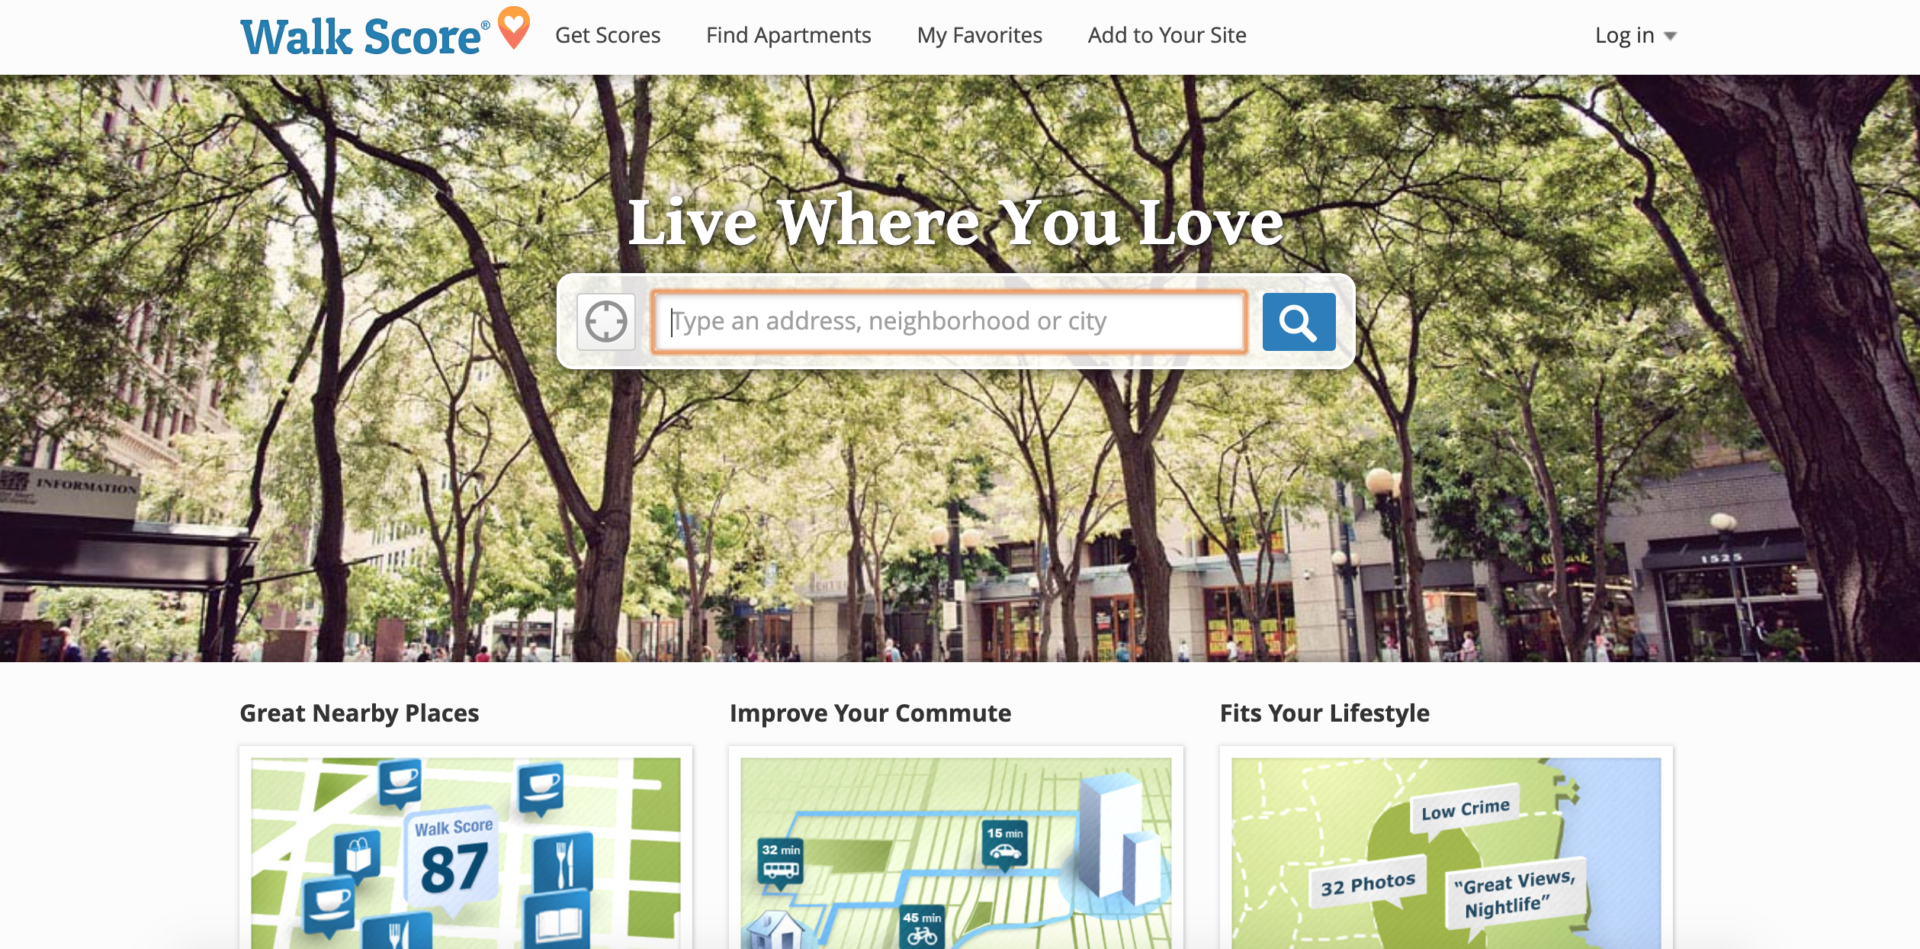 The Best Websites To Help You Find The Perfect Apartment - Walkscore